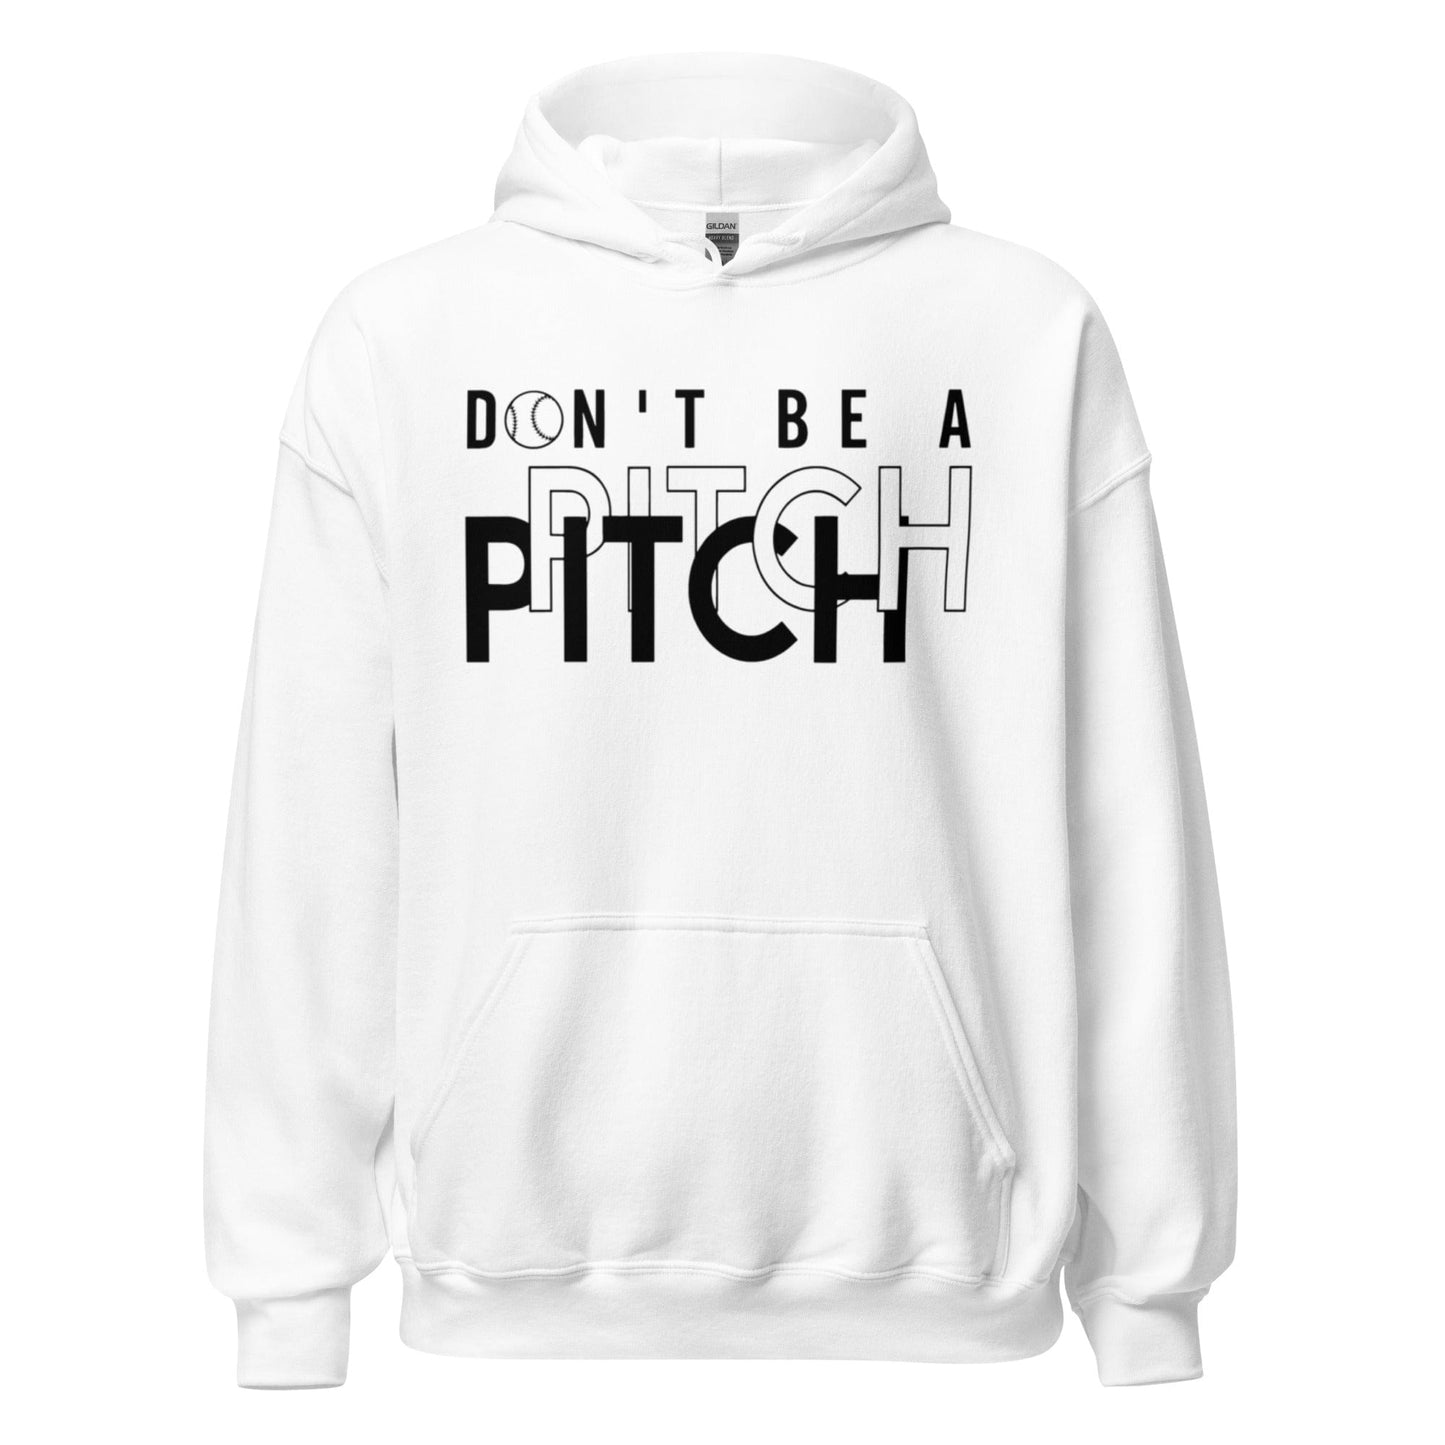 Don't Be A Pitch - Adult Hoodie